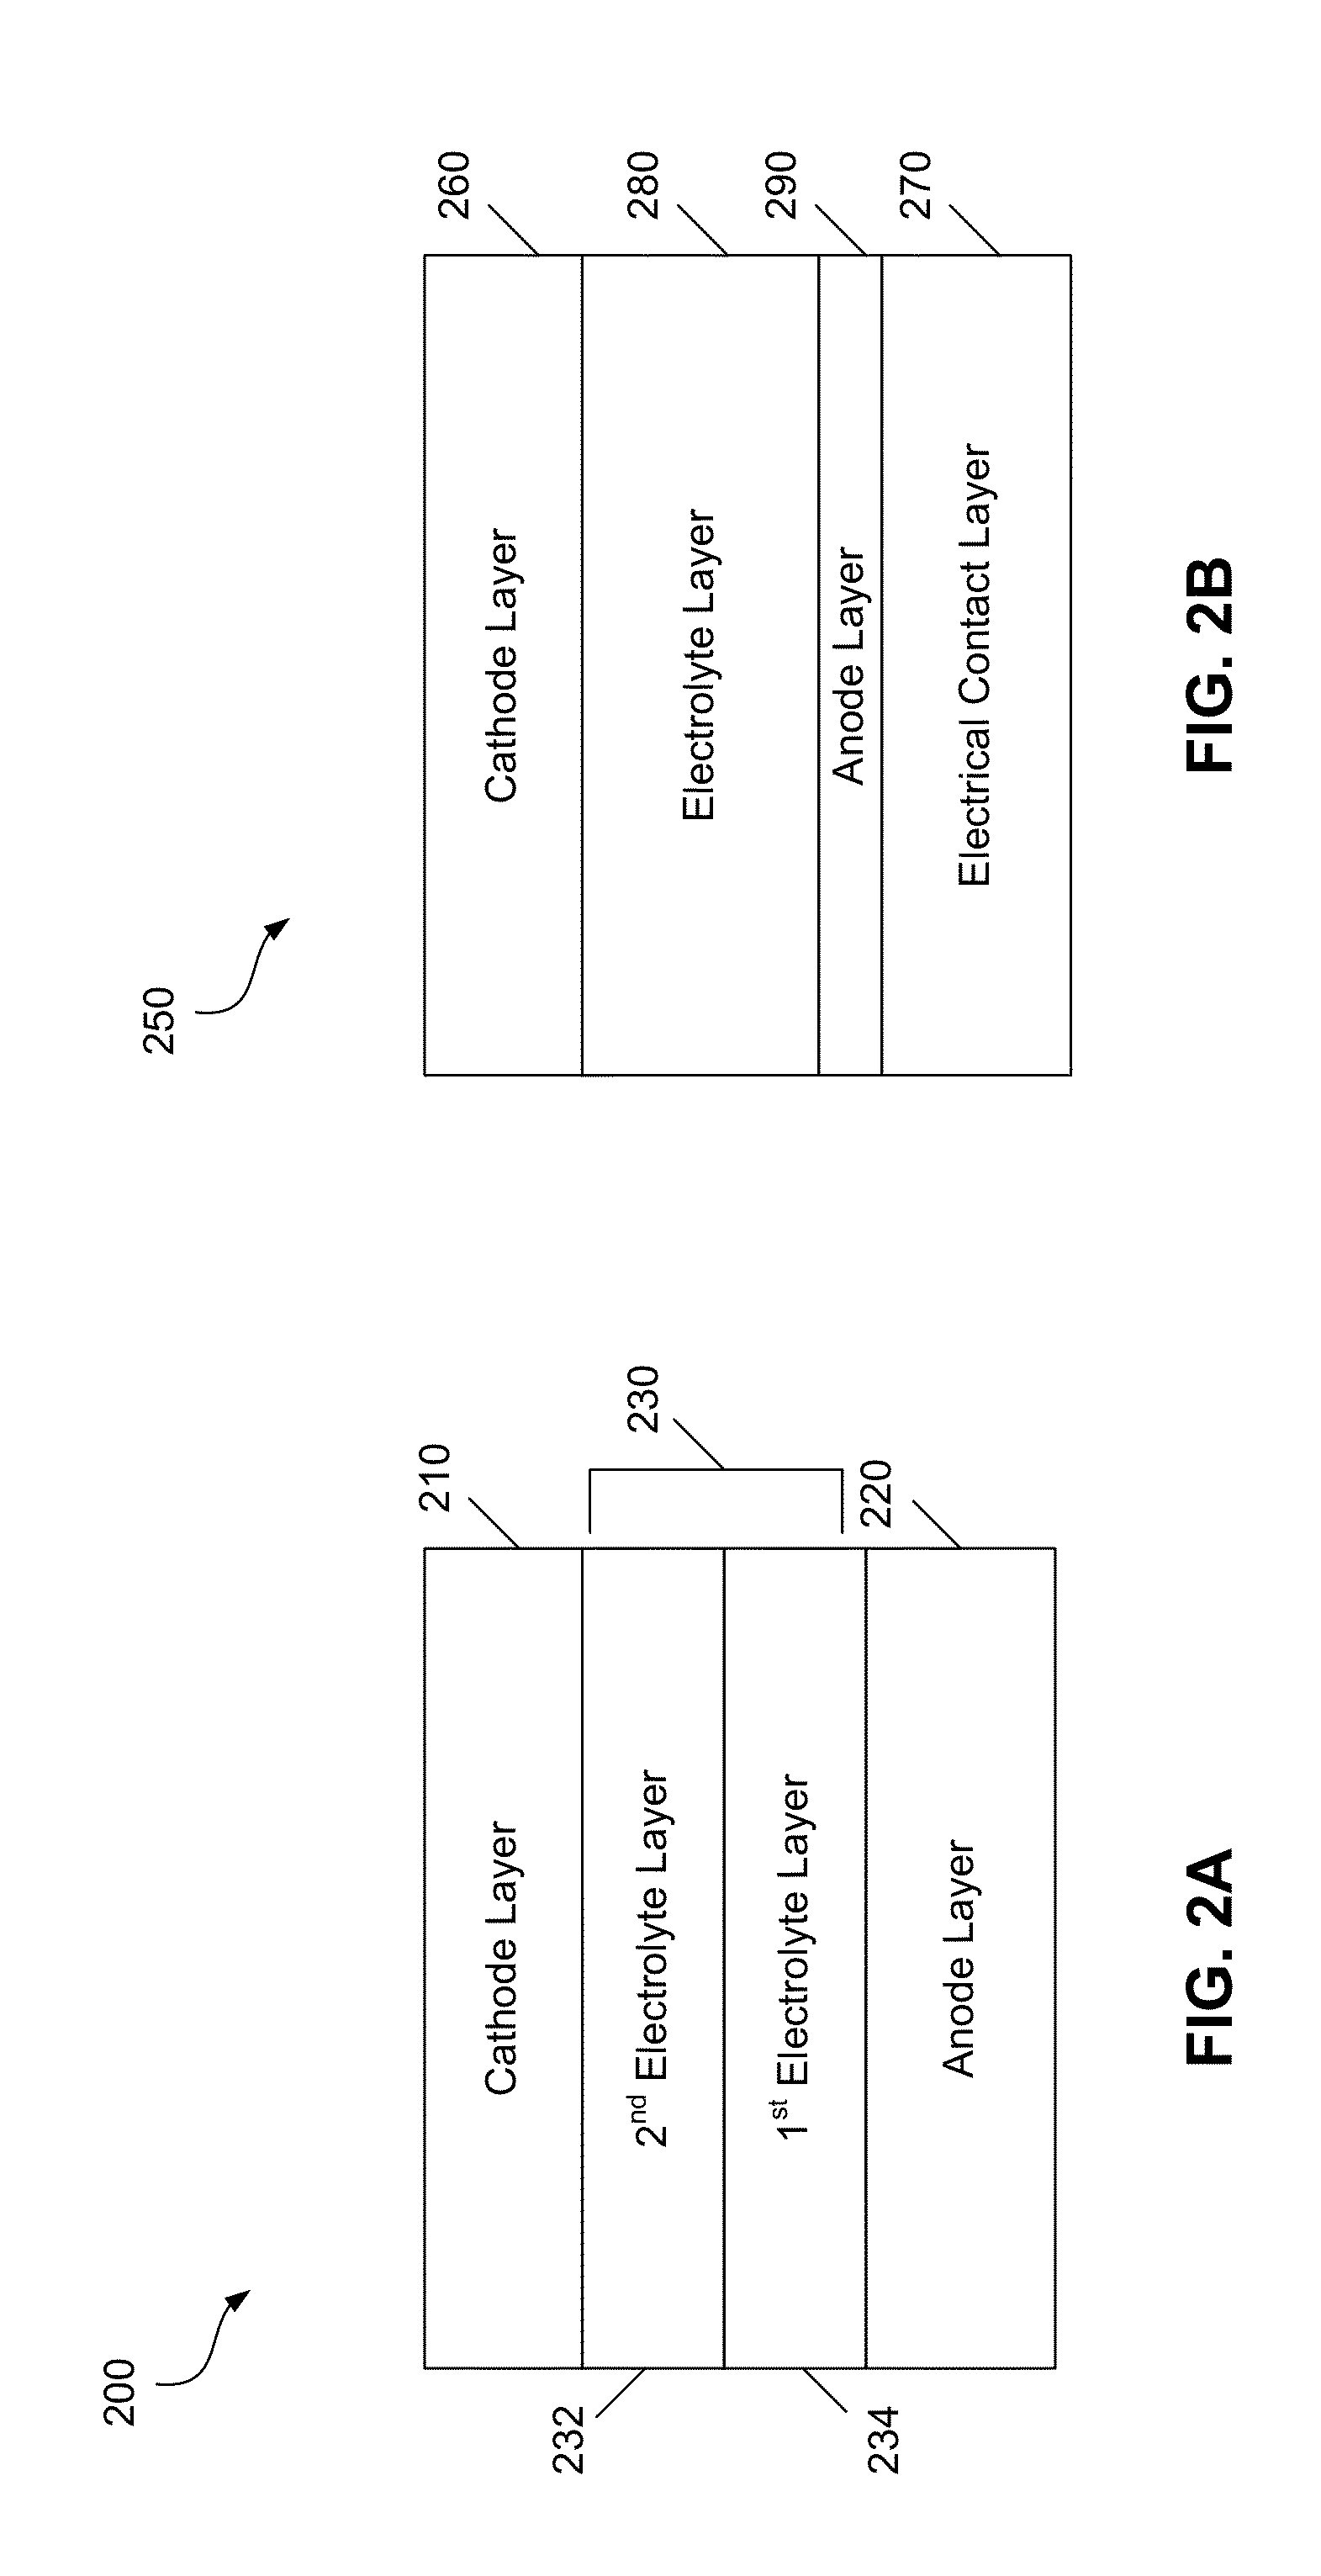 Ceramic Anode Materials for Solid Oxide Fuel Cells